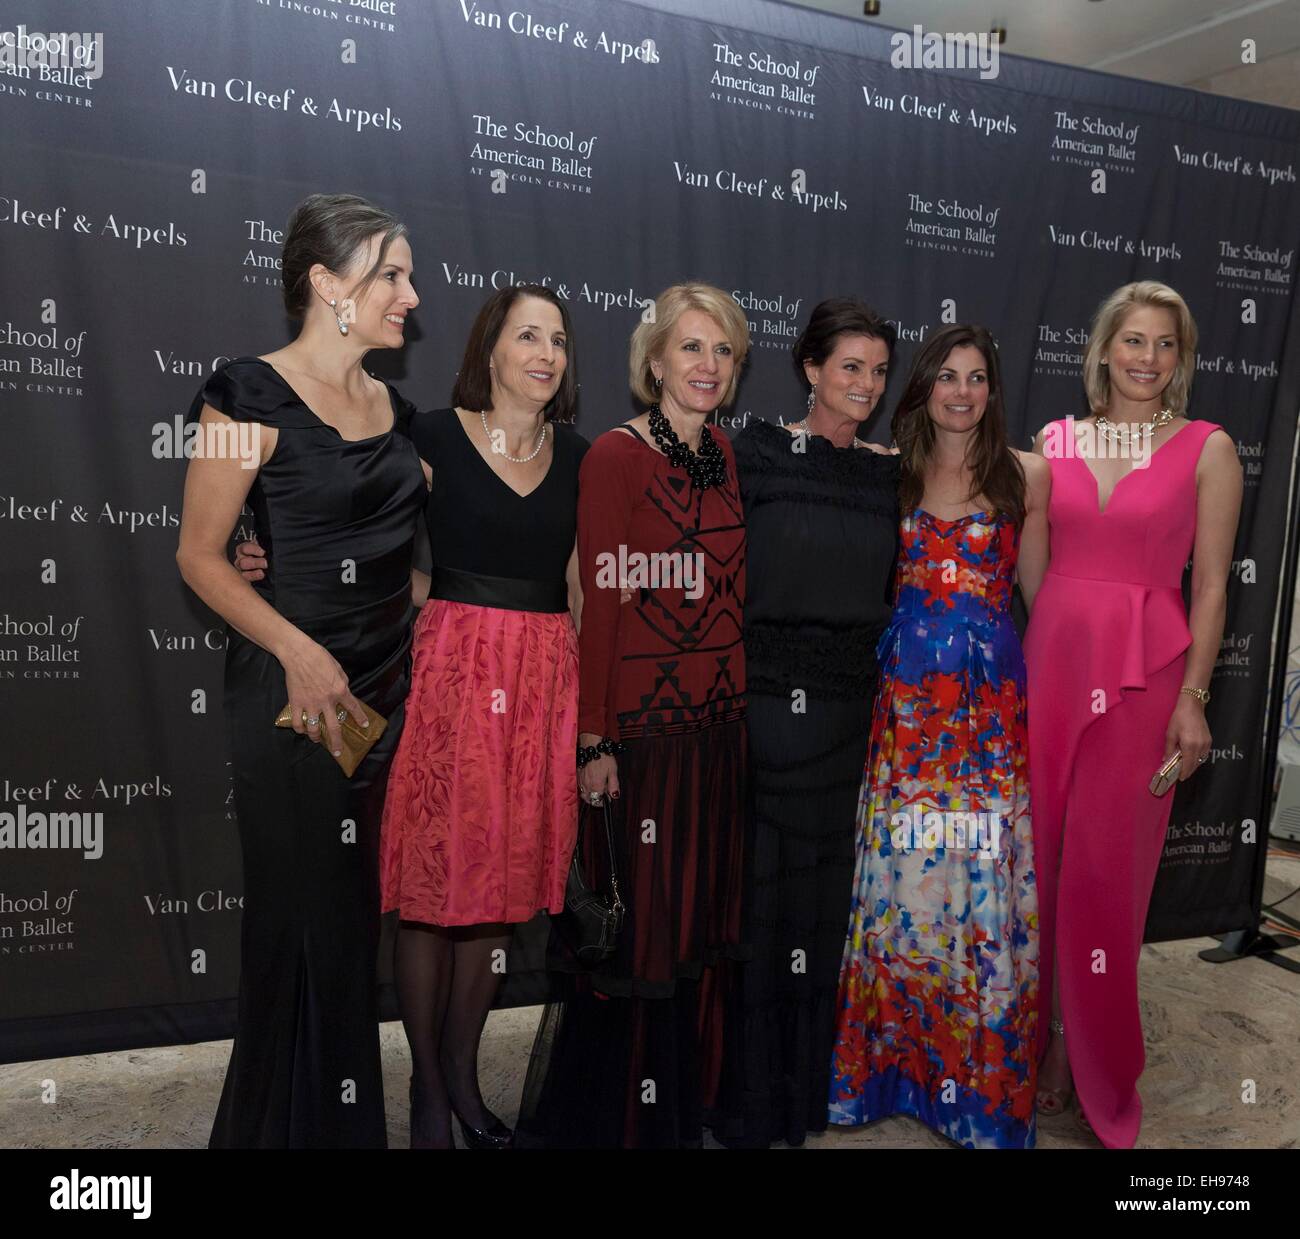 New York, NY, USA. 9th Mar, 2015. Elizabeth Gunter, Susan Hartley-Coll, Liz Armstrong, Katie Morley, Kristine Morenz at arrivals for The School of American Ballet 2015 Winer Ball, David H. Koch Theater at Lincoln Center, New York, NY March 9, 2015. © Lev Stock Photo